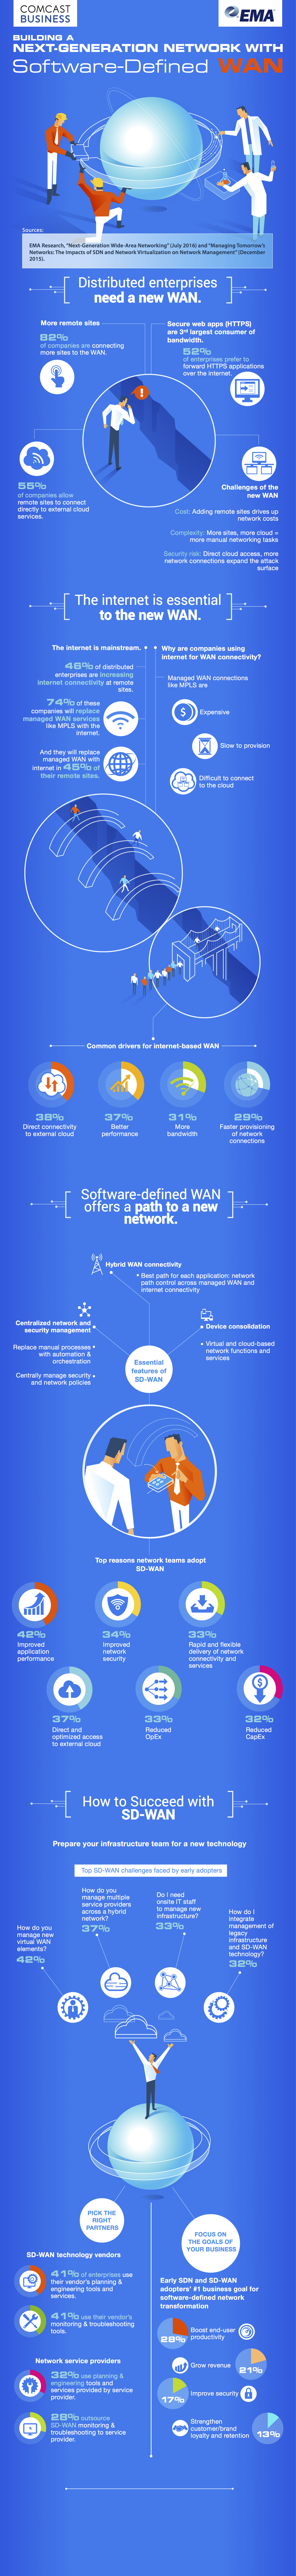 Building a cloud-sentric hybrid network infographic